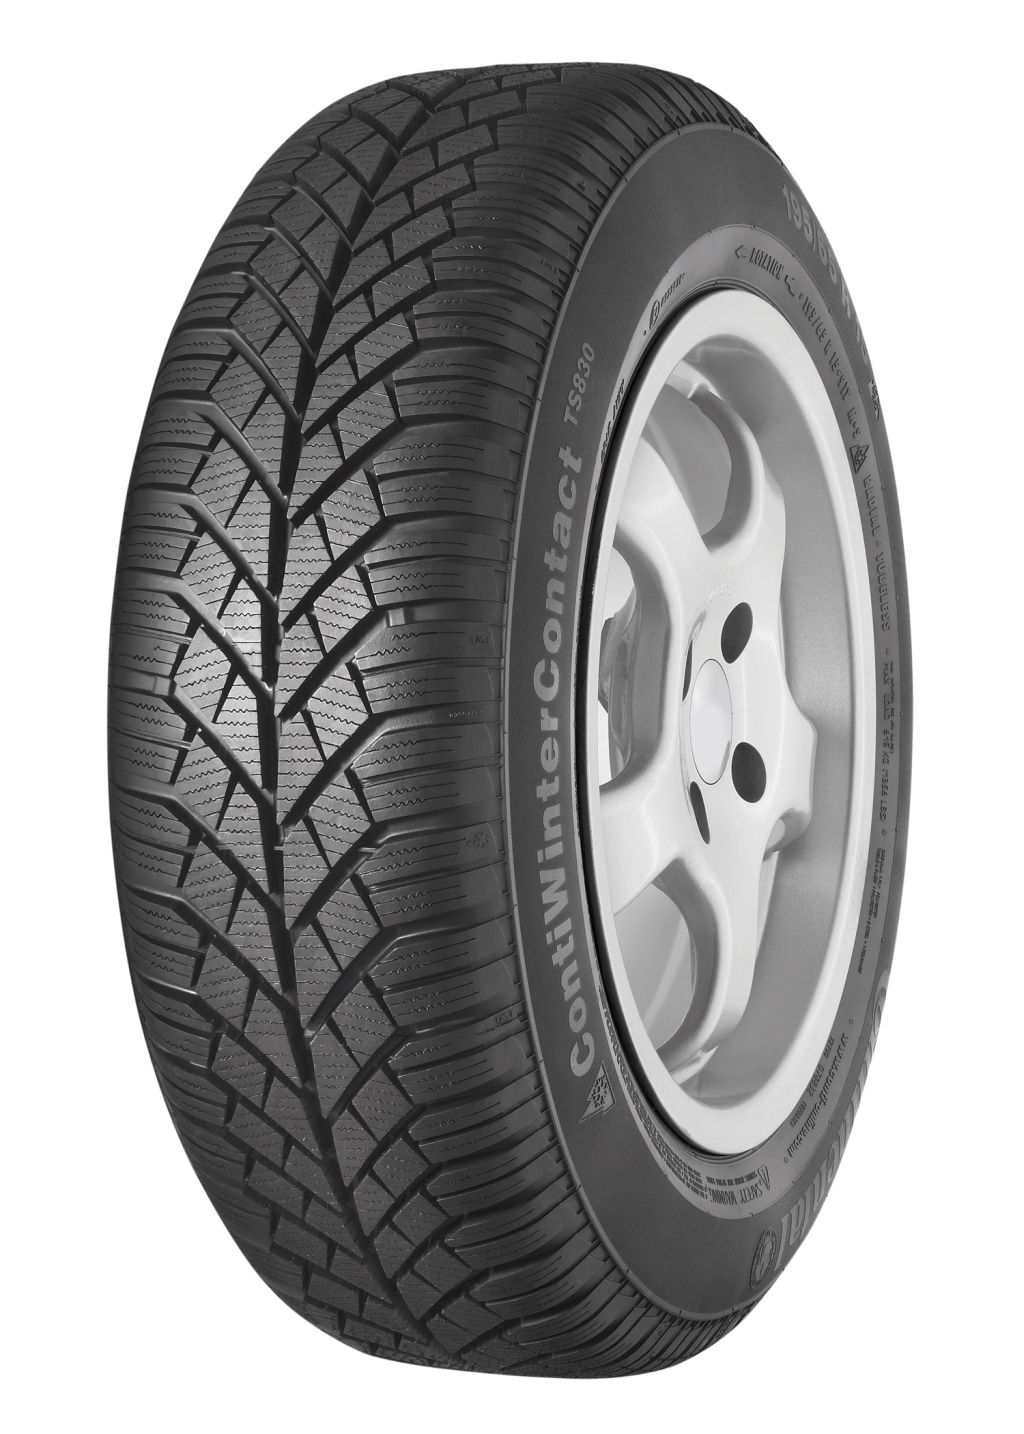 Quick question around tyre pressure. My tyre is 205/55 R16 91V. But On the  door side recommendation (in the image) it only shows for R16 91W and R16  91V M + S